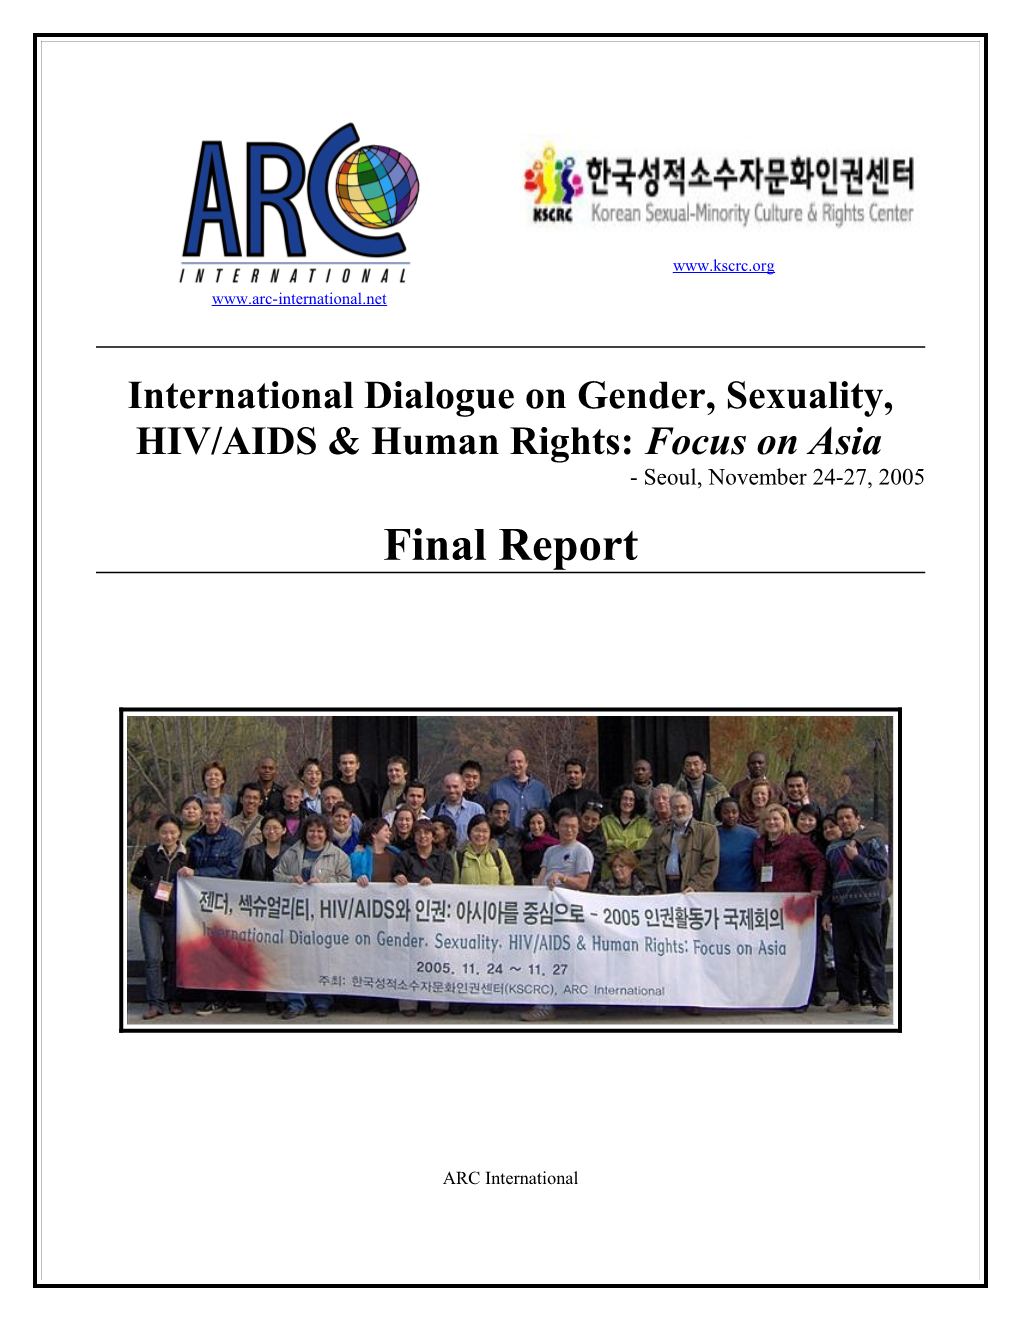 International Dialogue on Gender, Sexuality, HIV/AIDS & Human Rights: Focus on Asia